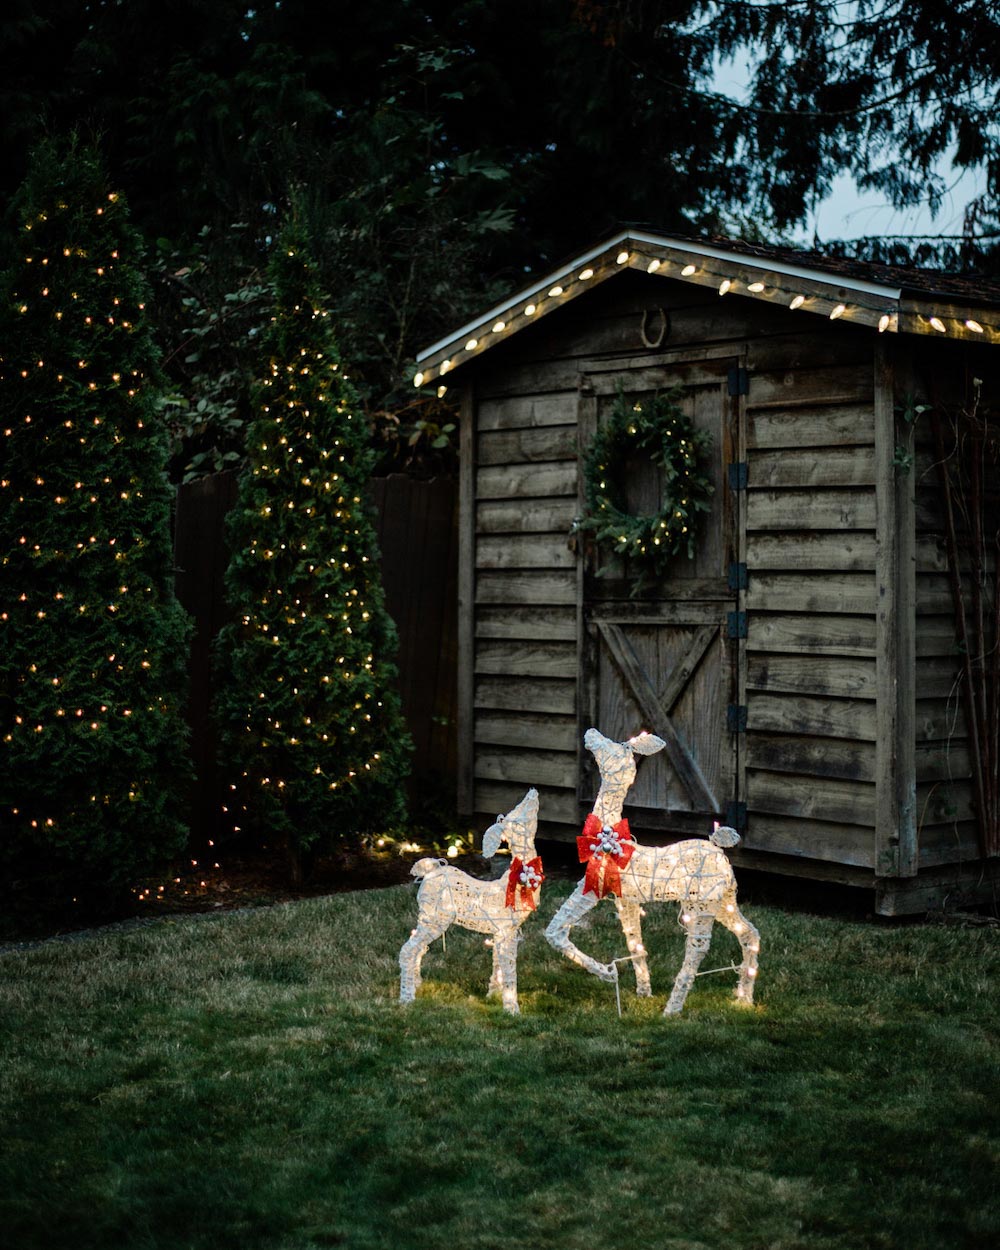 Outdoor shot of two holiday reindeer in the yard in front of a wooden shed